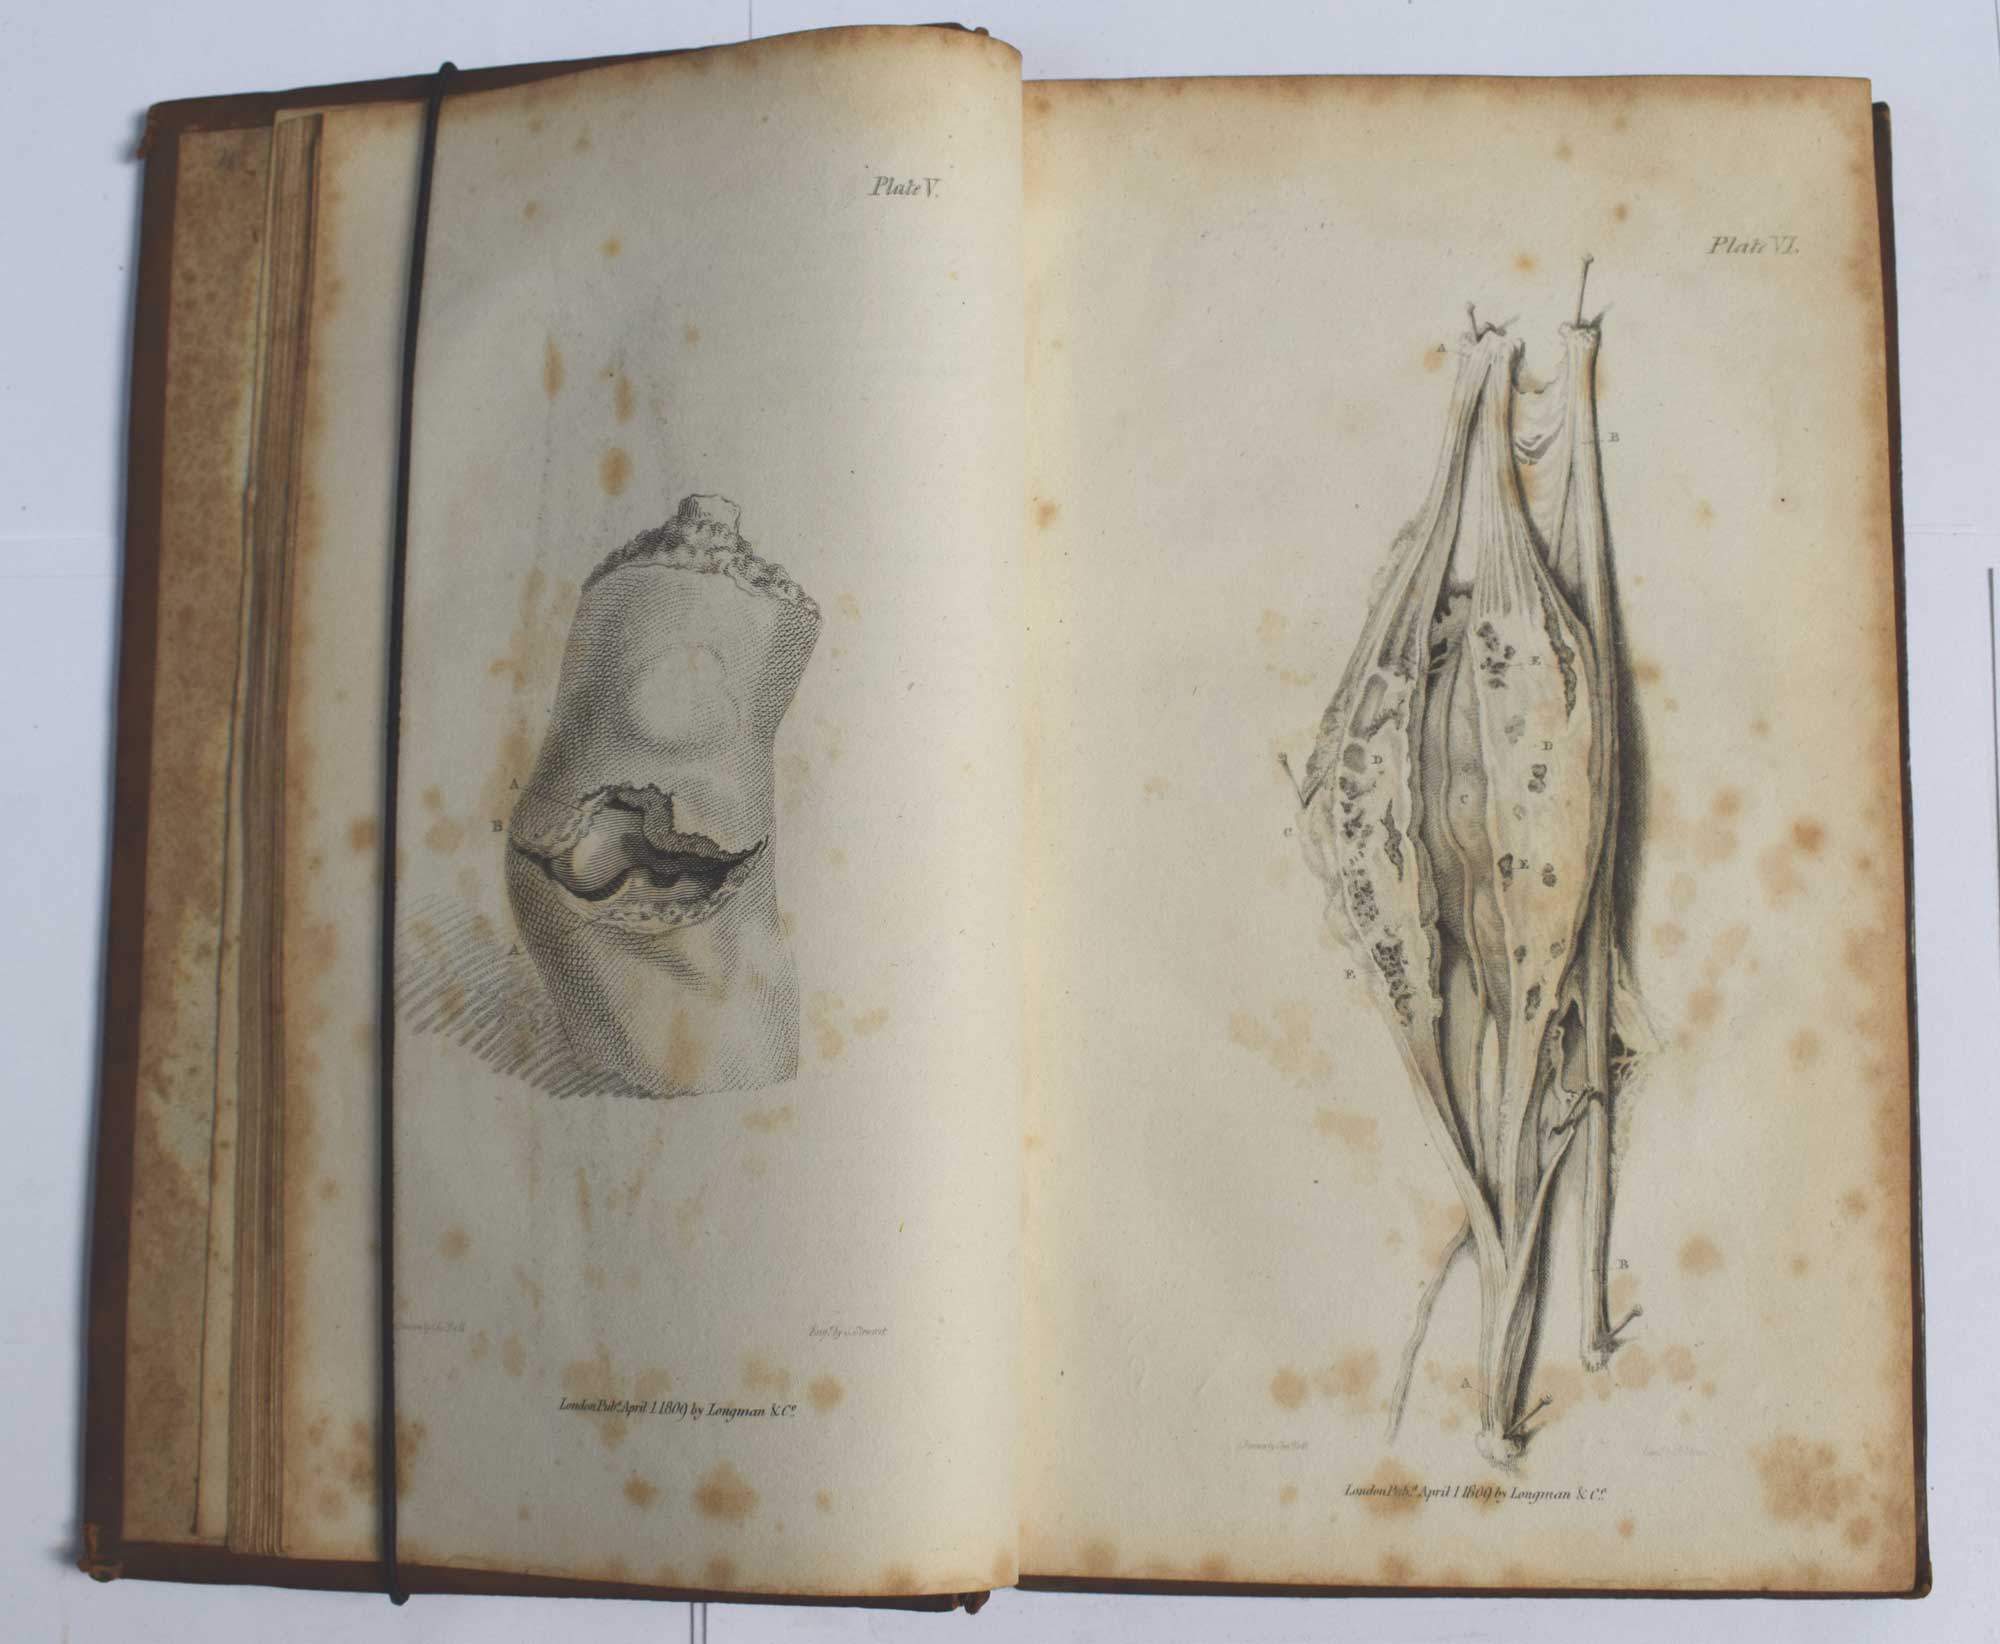 A System of Operative Surgery, Founded on the Basis of Anatomy. 2 Volume set.